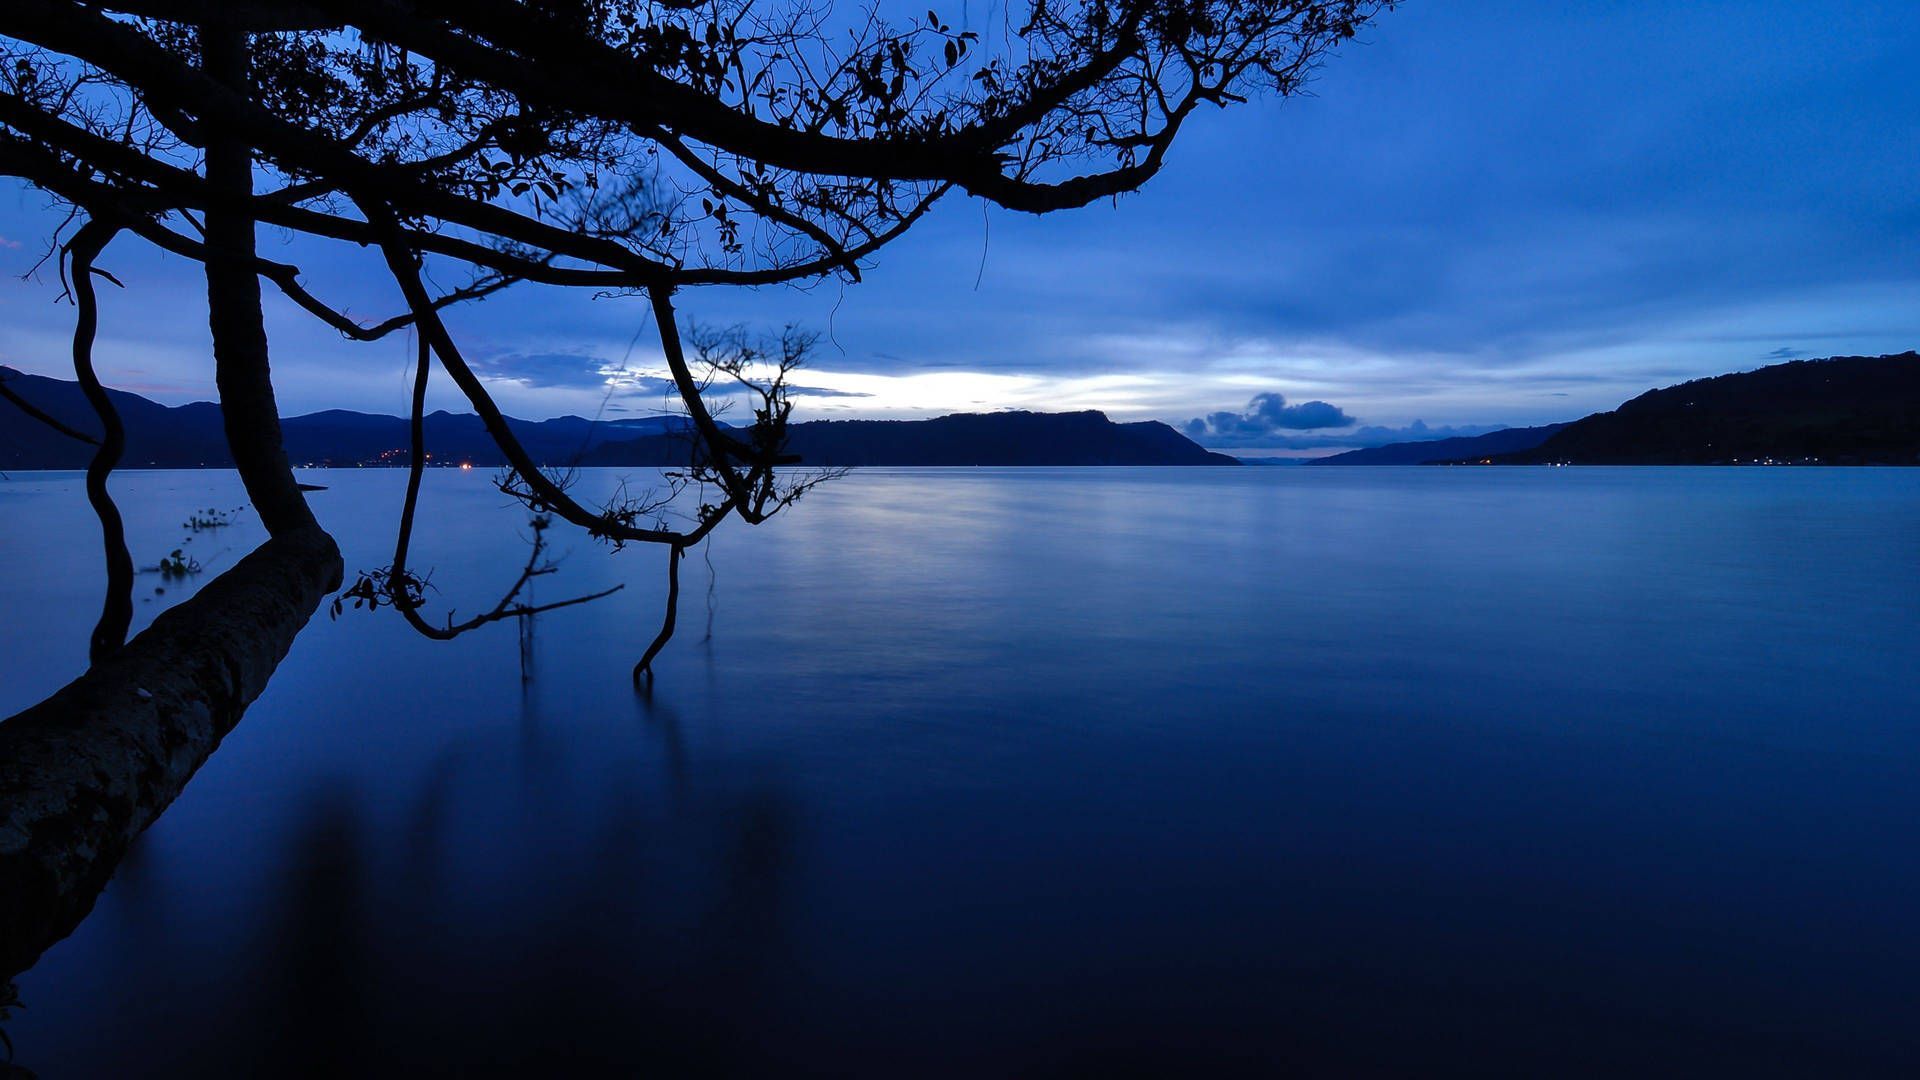 A calm lake at night with a tree in the foreground. - Dark blue, lake